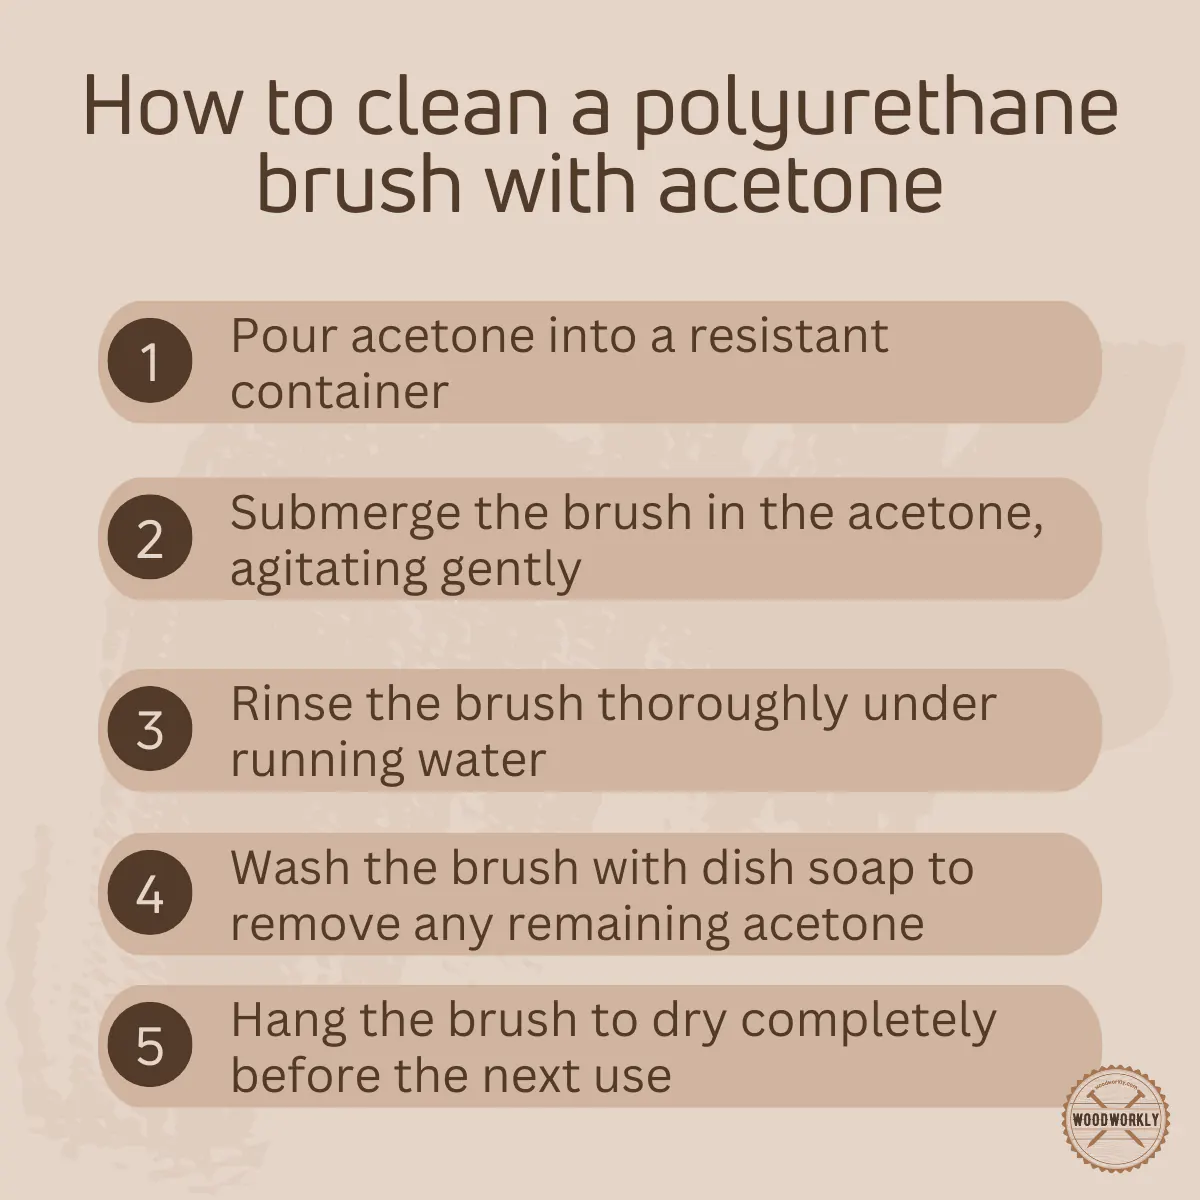 How to clean a polyurethane brush with acetone